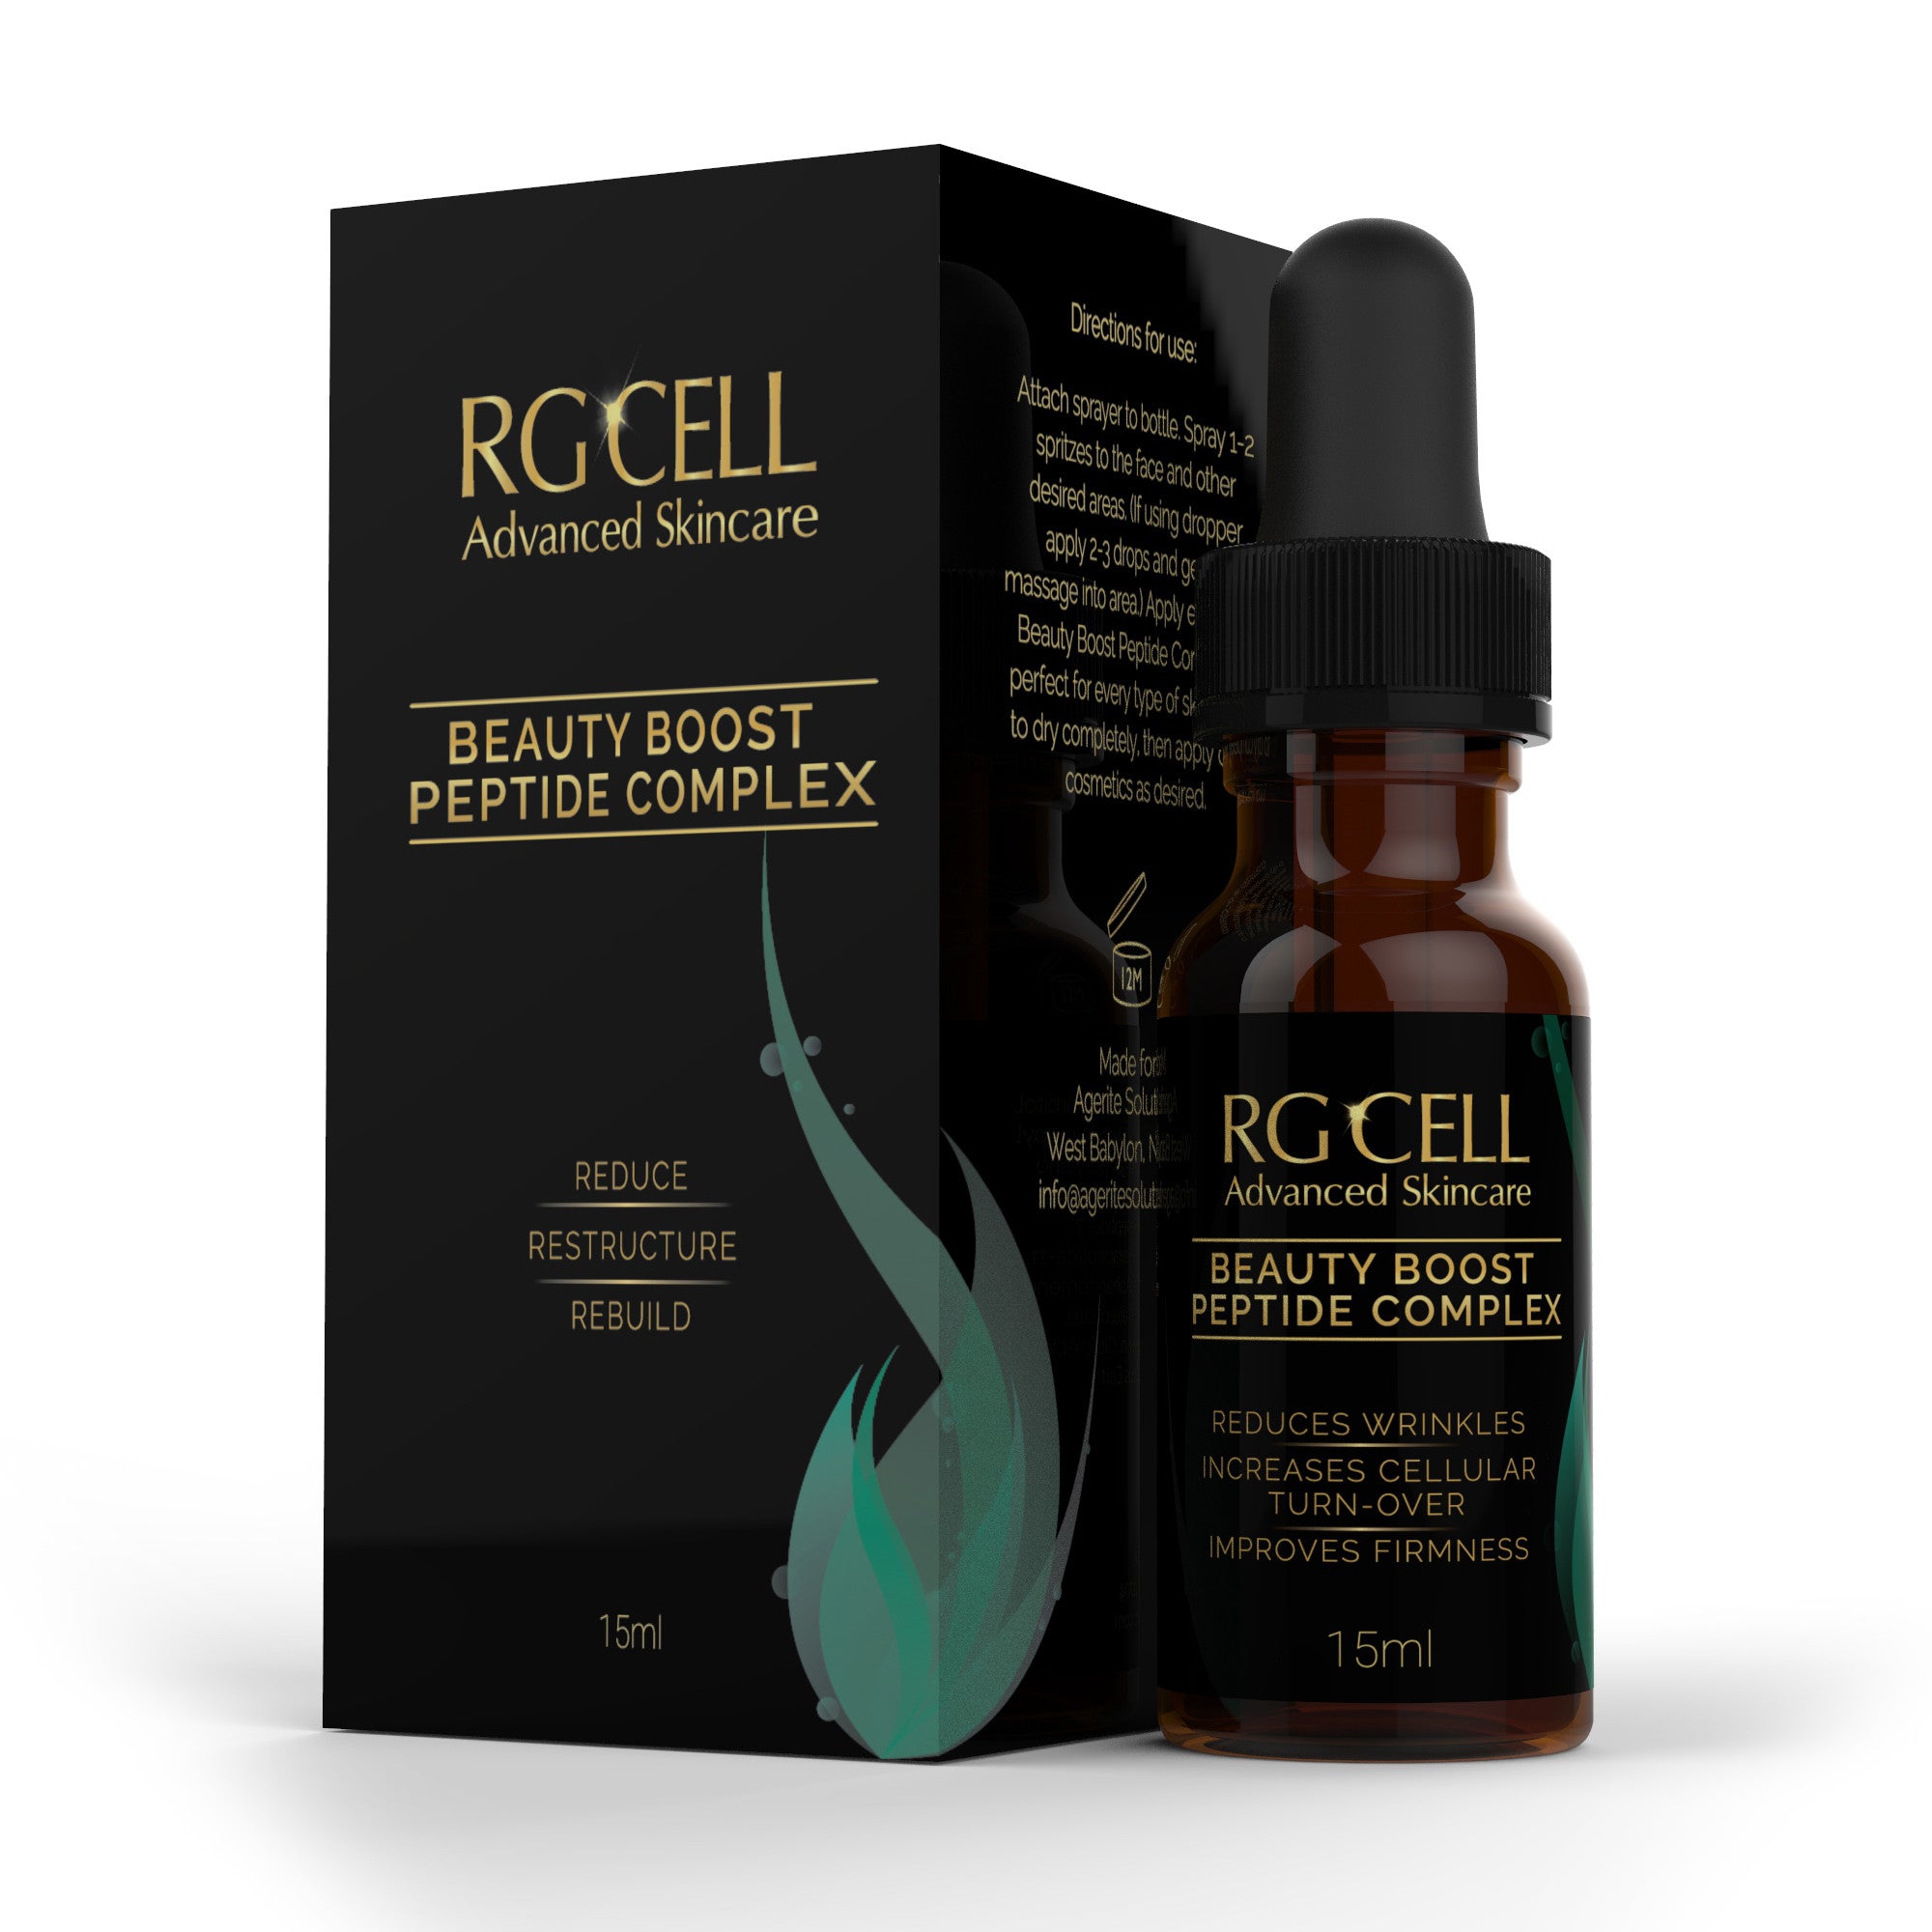 Beauty Boost Peptide Complex